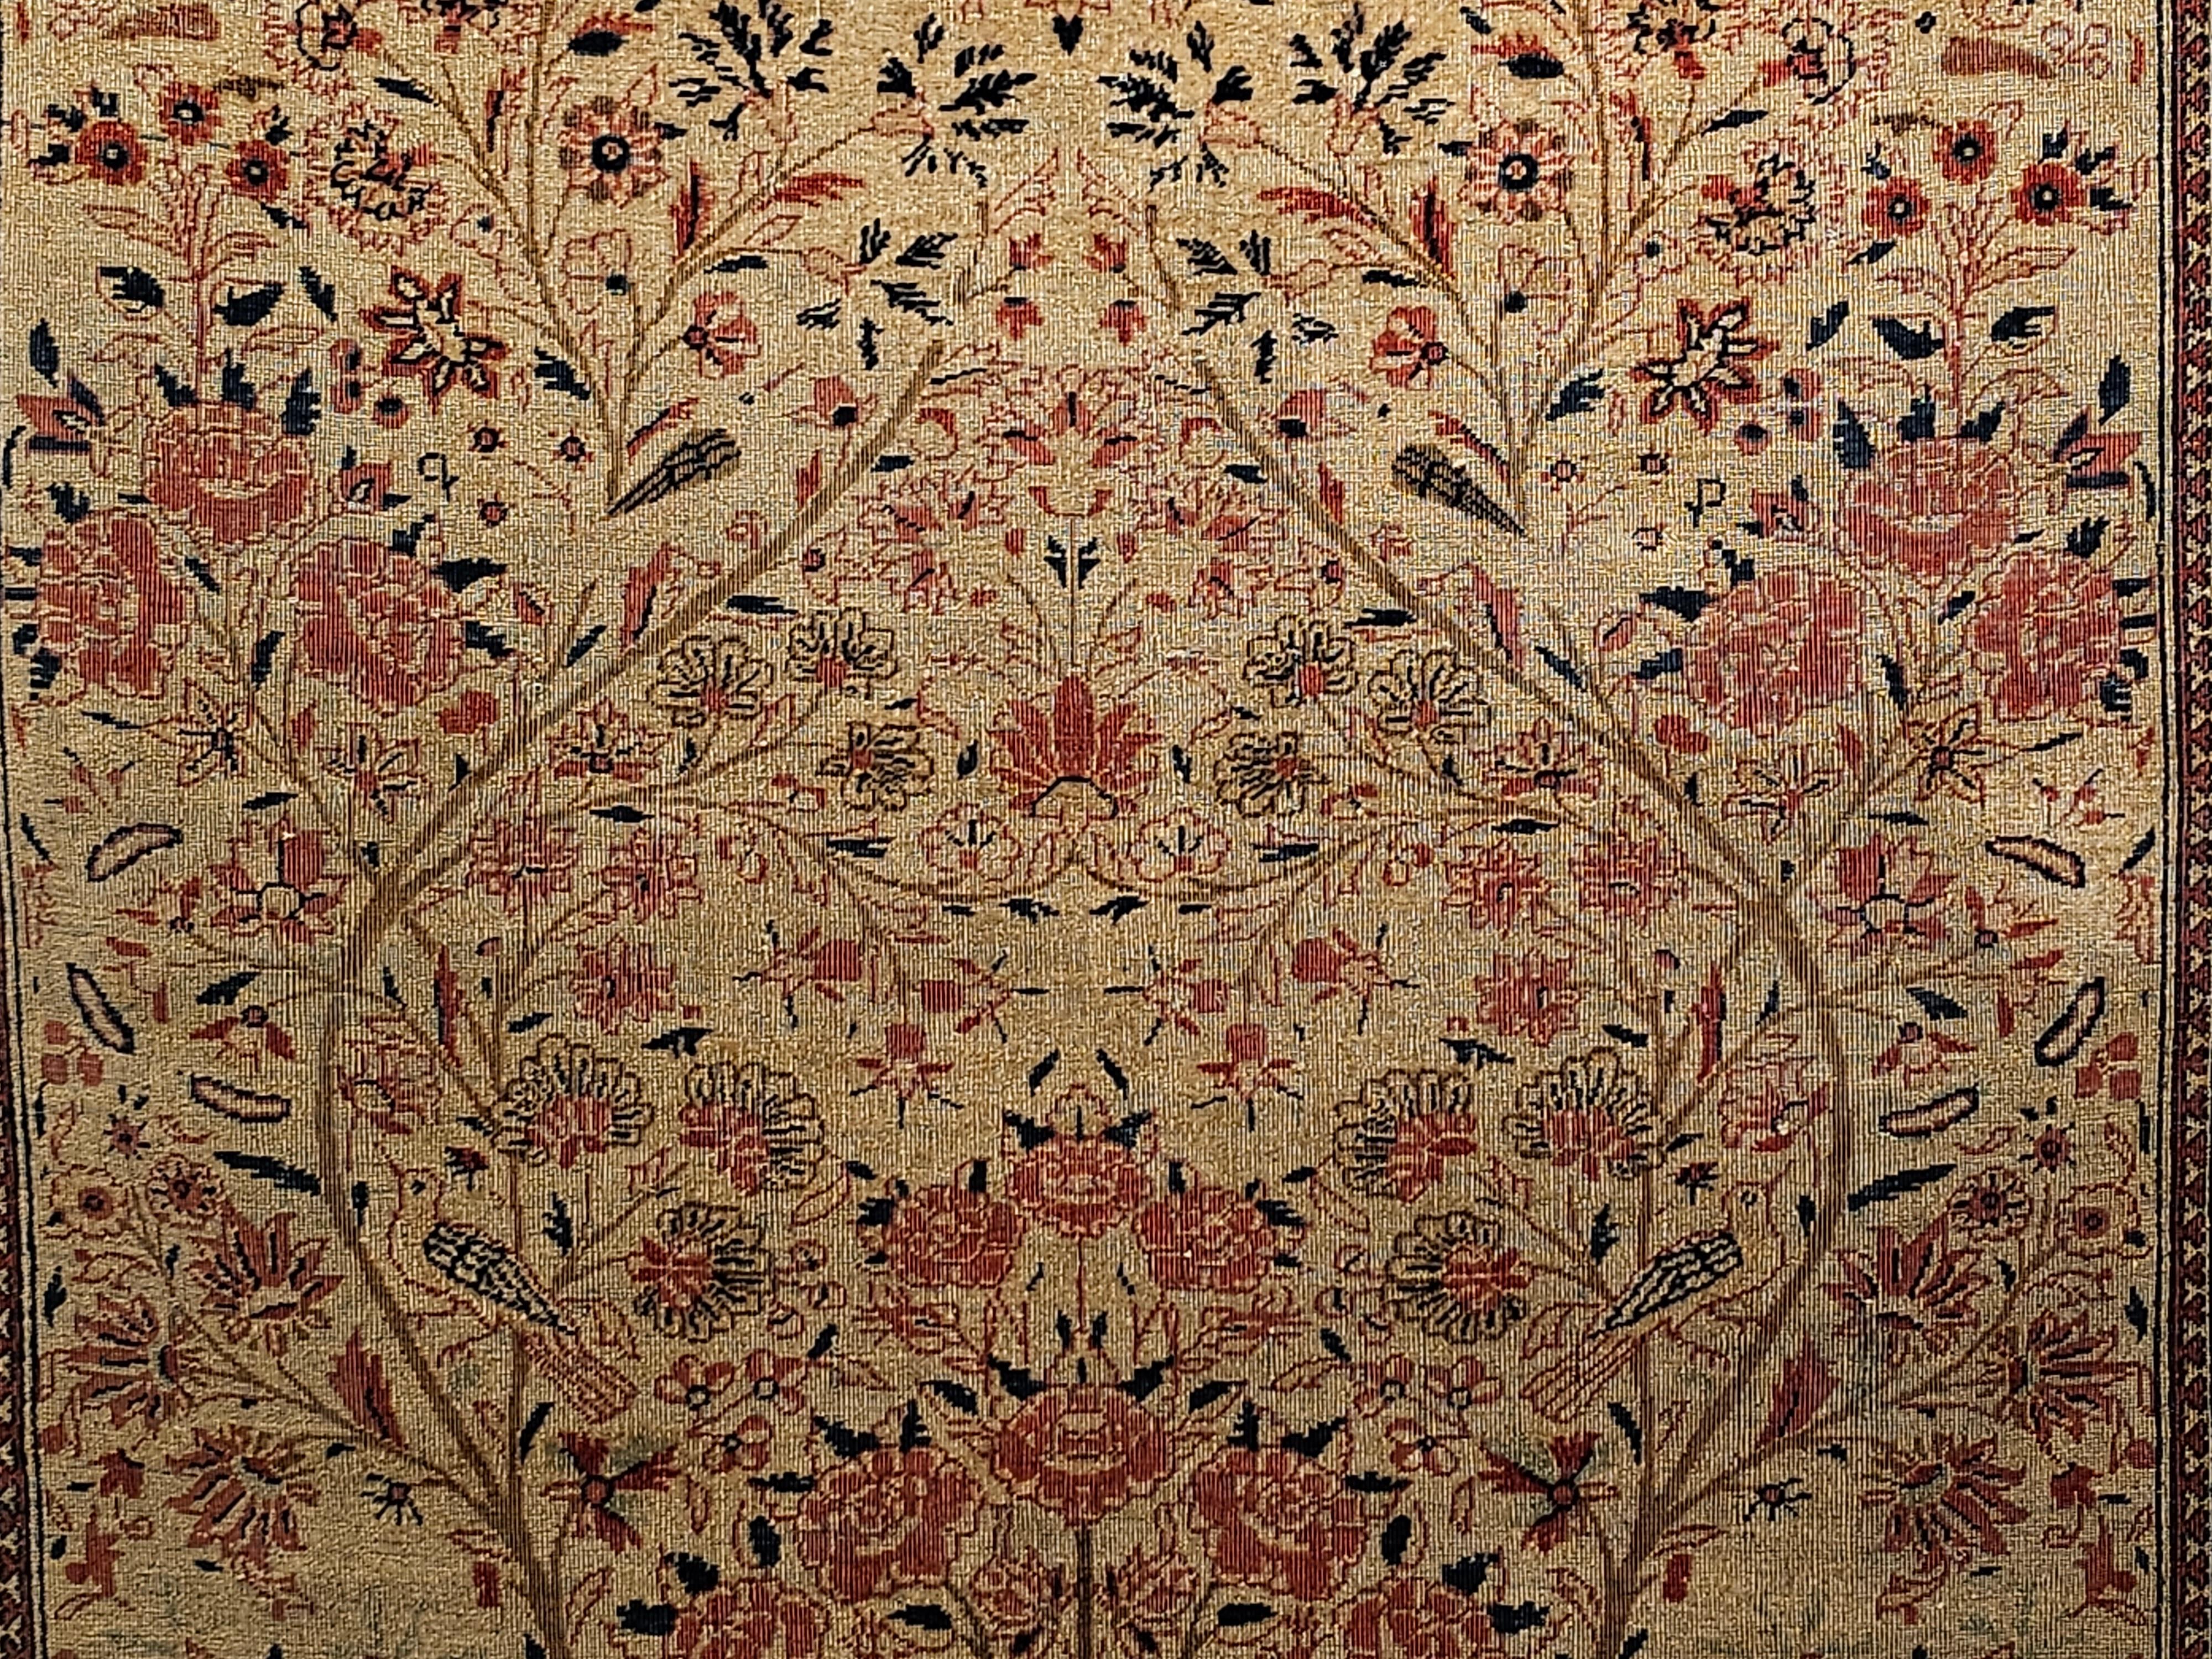 19th Century Persian Kashan Vase “Tree of Life” Rug in Ivory, Brick Red, Navy For Sale 1